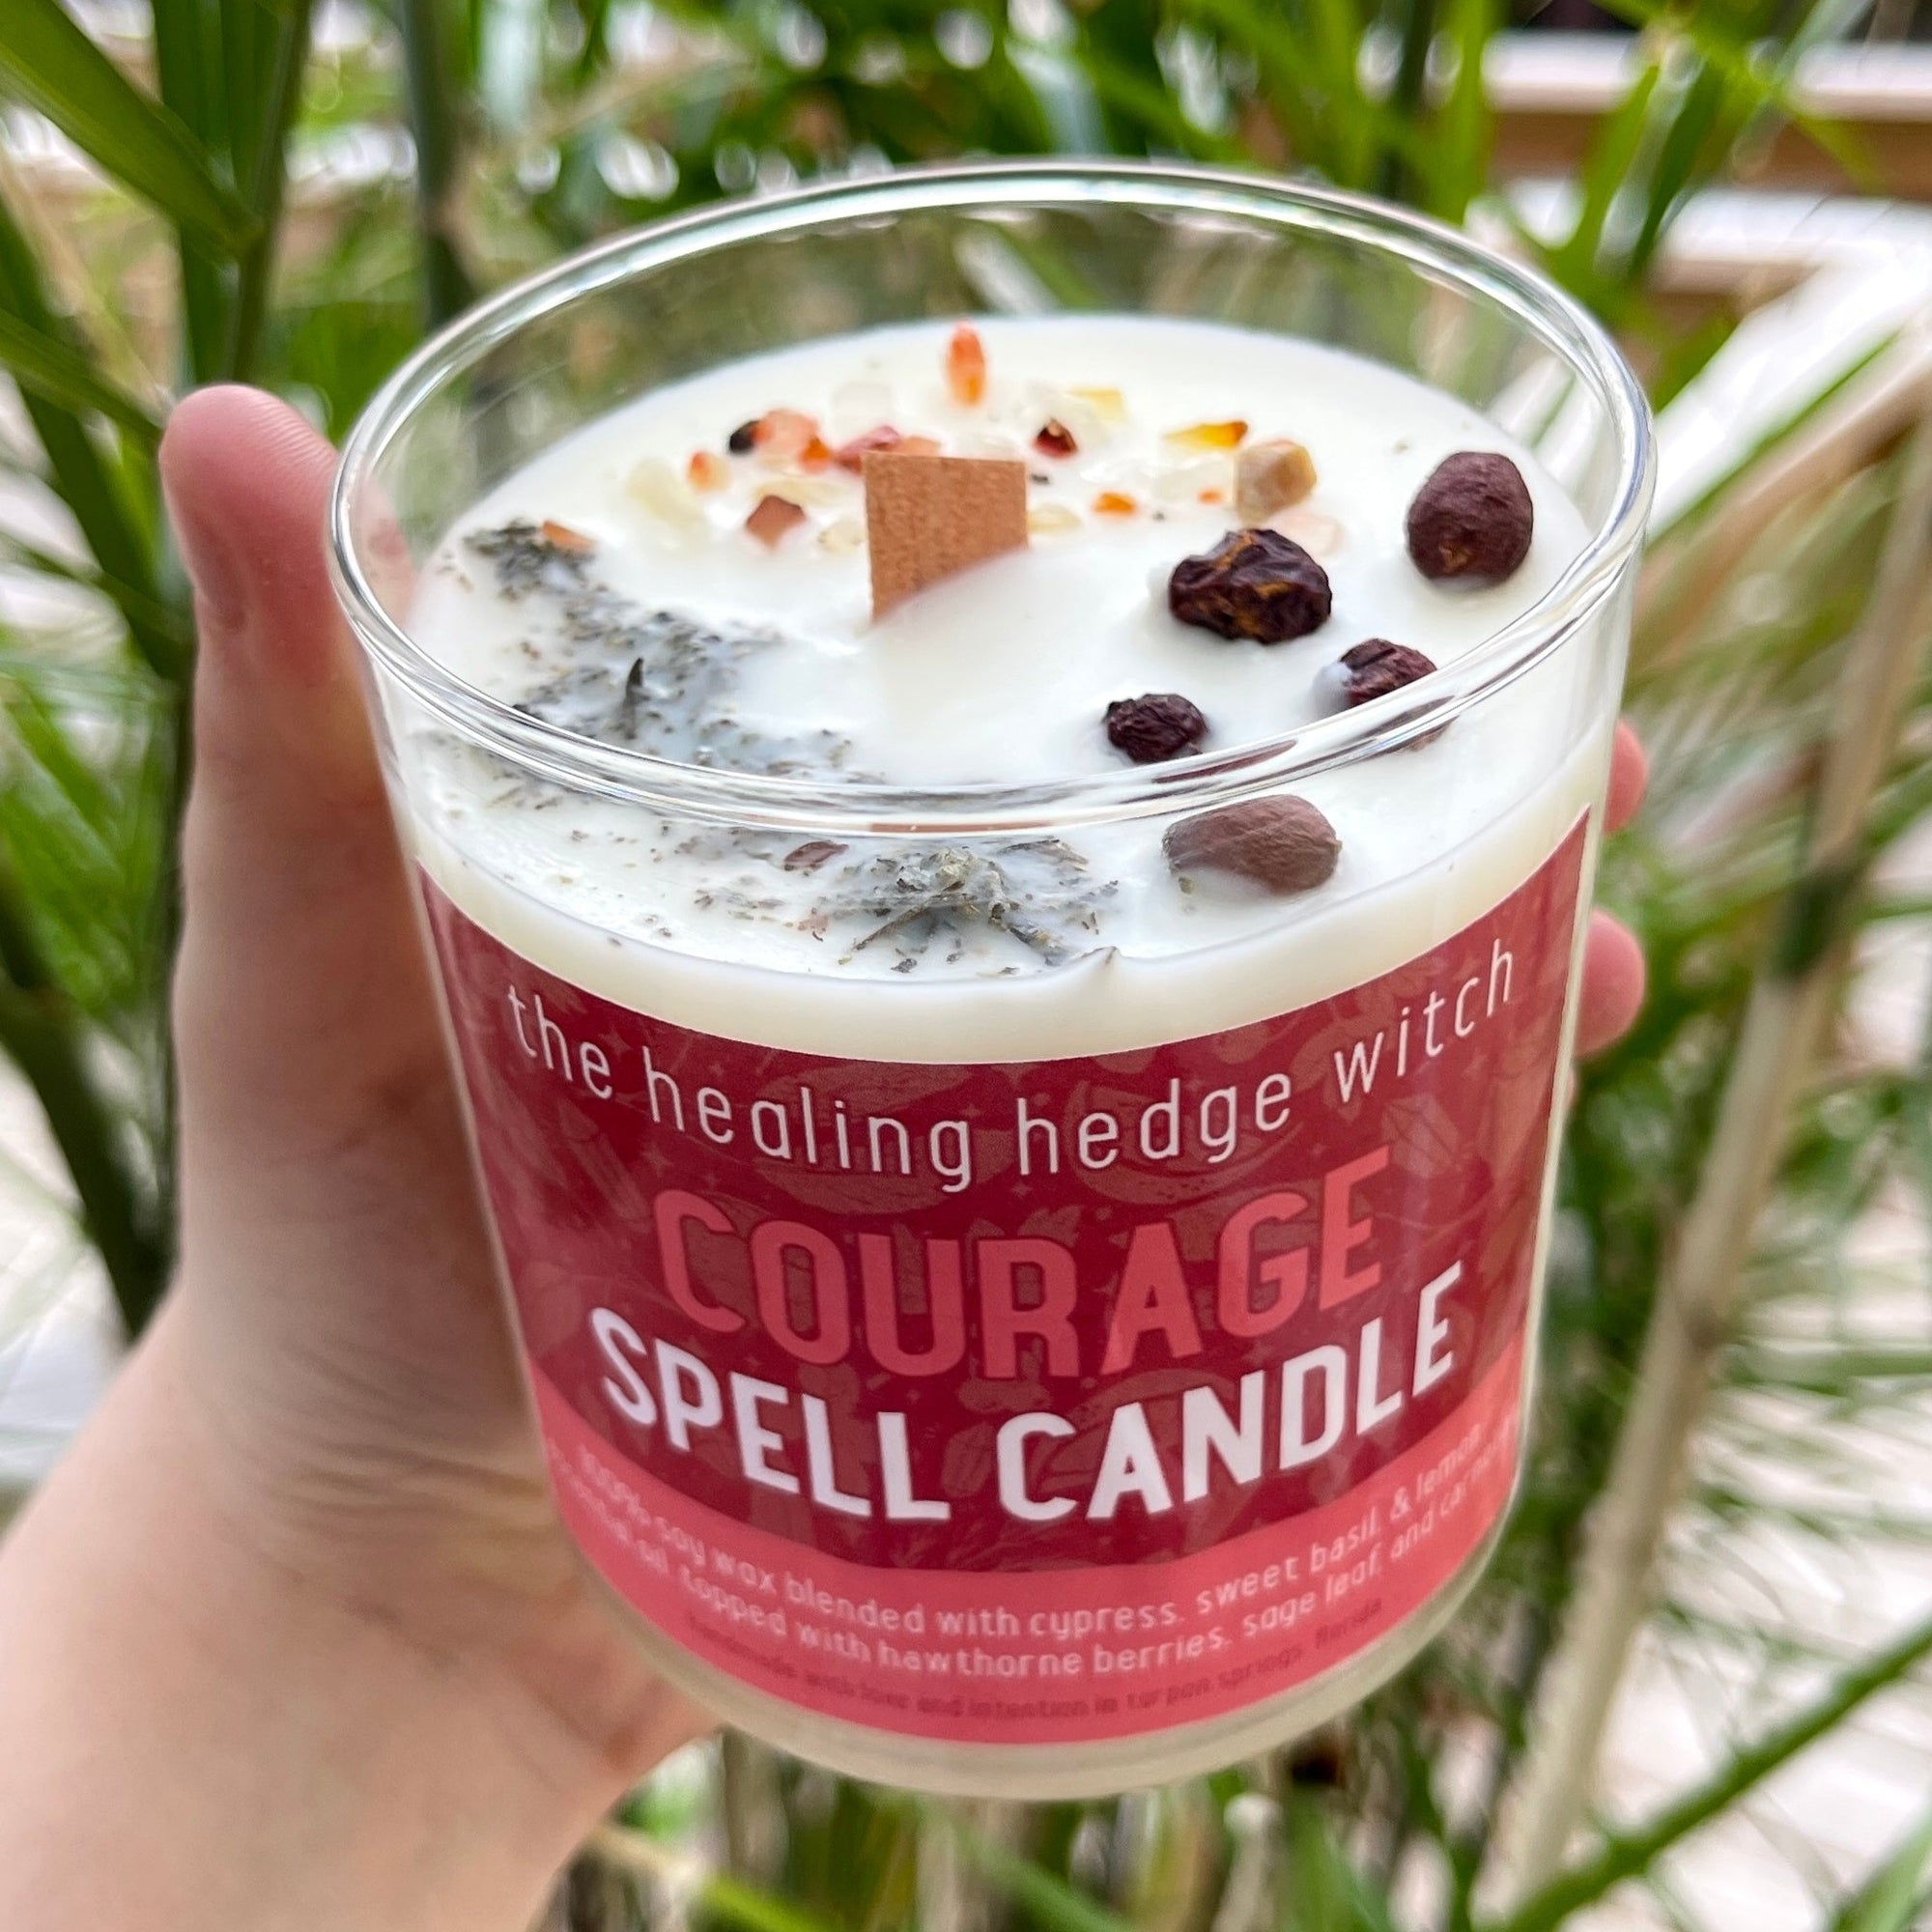 Courage Spell Candle